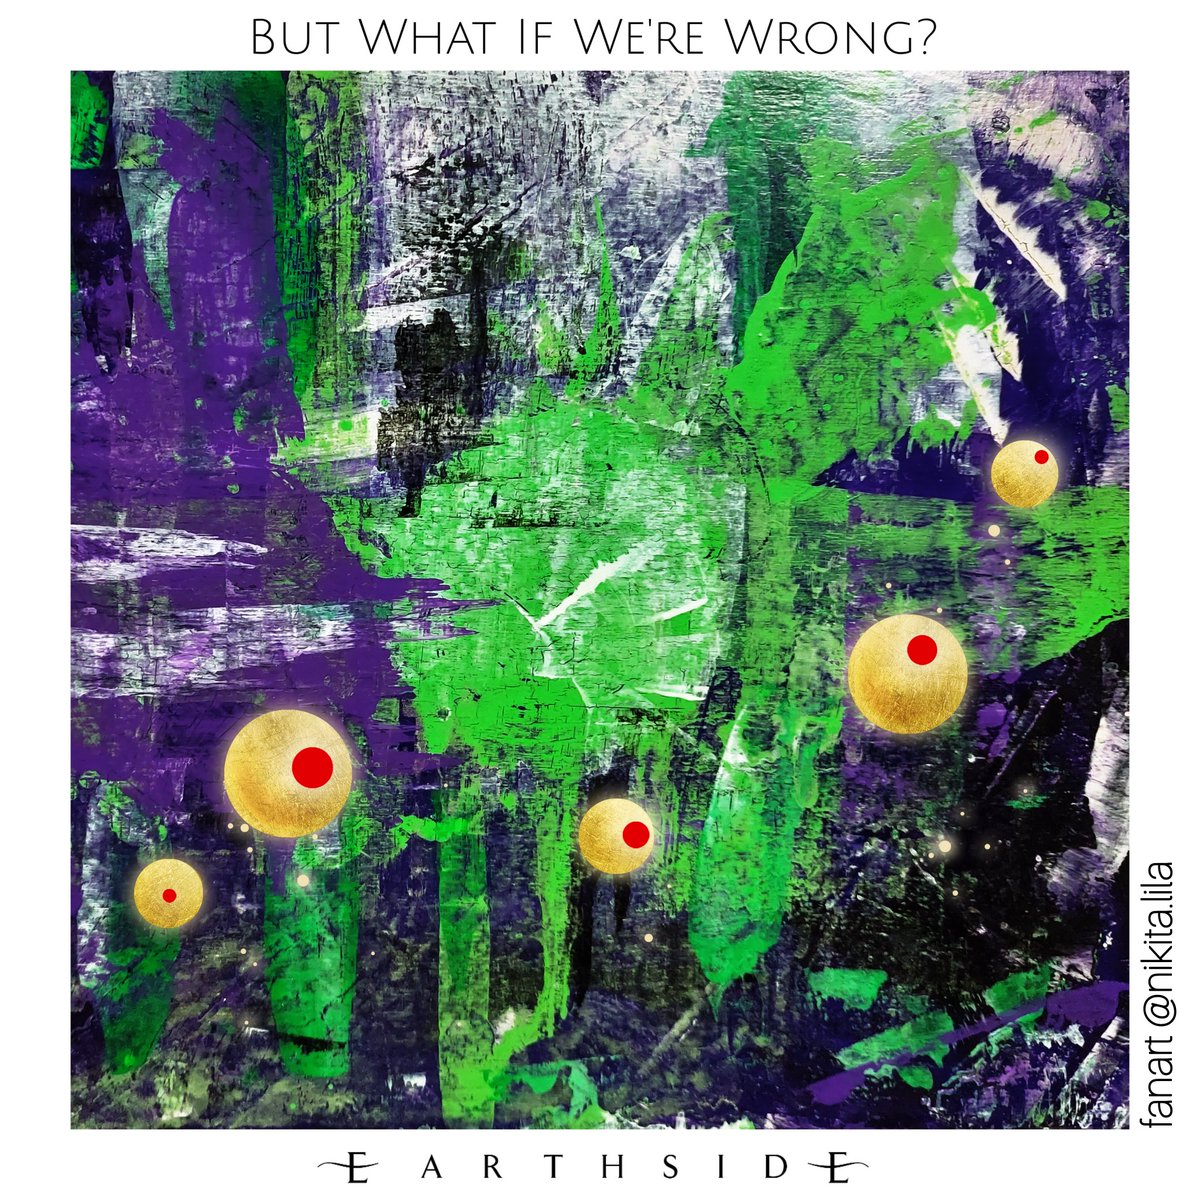 #FanArtFriday But What If We're Wrong by Earthside ft. Sandbox Percussion. This is the opening track of their outstanding new album 'Let The Truth Speak'. I love the song's heaviness and yet flowing and haunting light-filled melody. #progmetal #NewMusic open.spotify.com/track/1ALz6fFM…